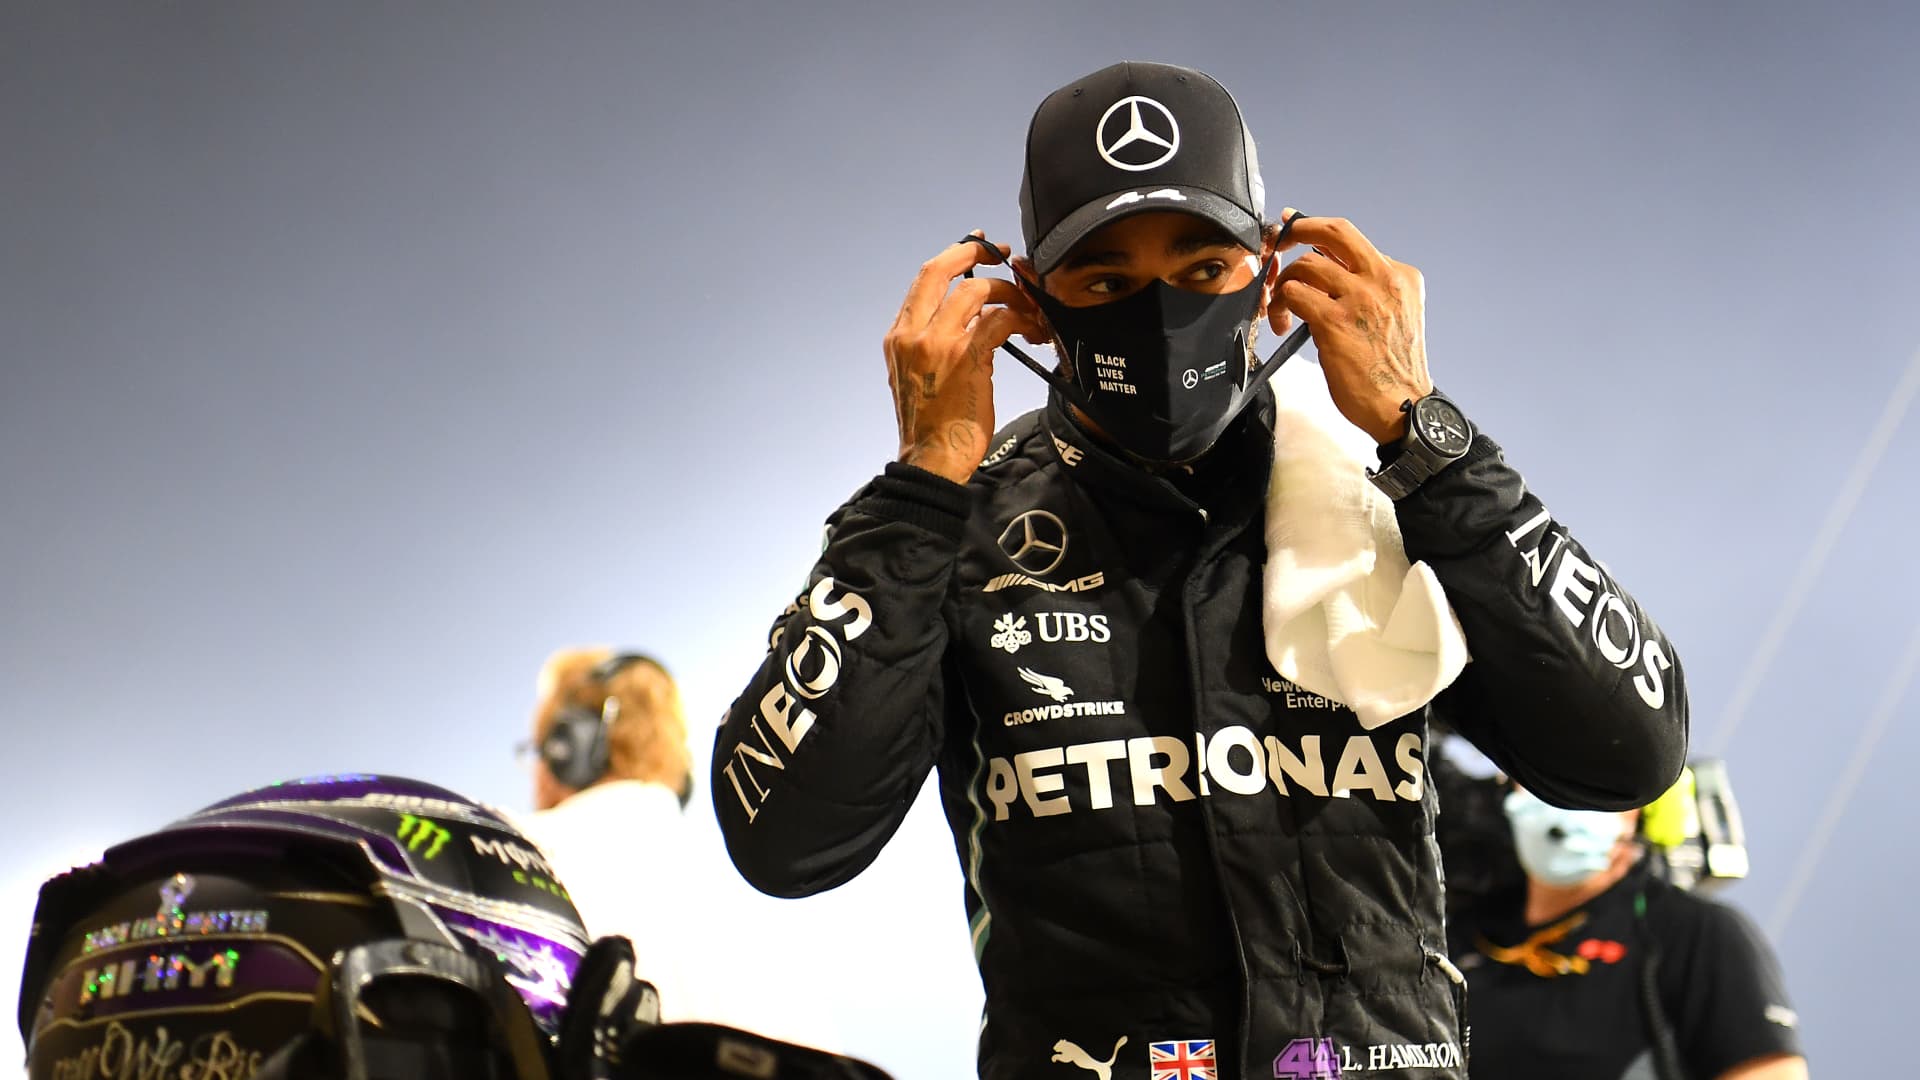 Race winner Lewis Hamilton of Great Britain and Mercedes GP looks on in parc ferme during the F1 Grand Prix of Bahrain at Bahrain International Circuit on November 29, 2020 in Bahrain, Bahrain.